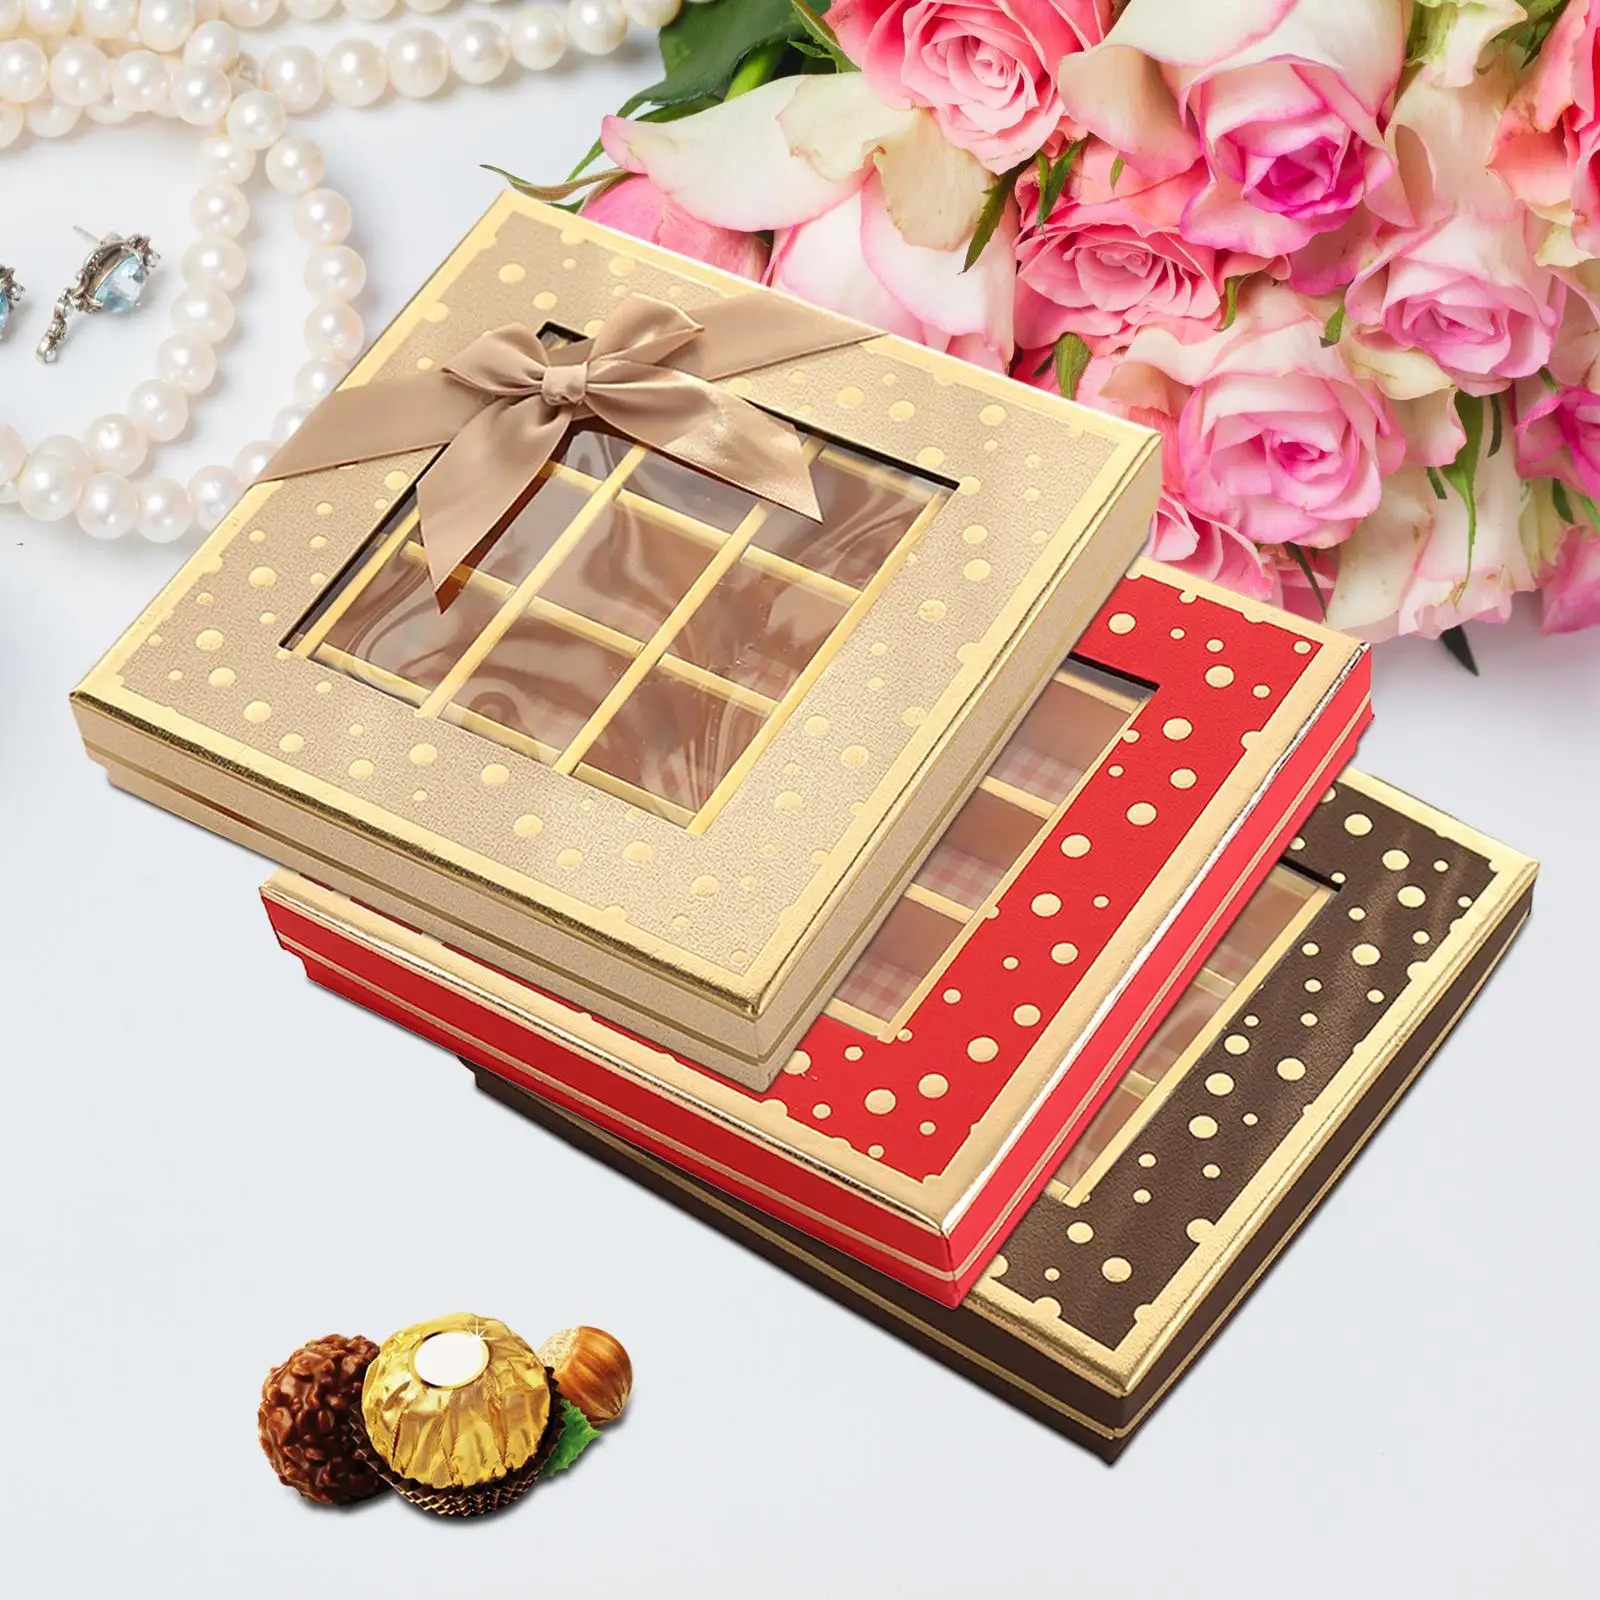 Chocolate Box 25 Inner Grids Valentines Day Gift Box for Party Favor Anniversary Family Members Girlfriend Boyfriend Holidays